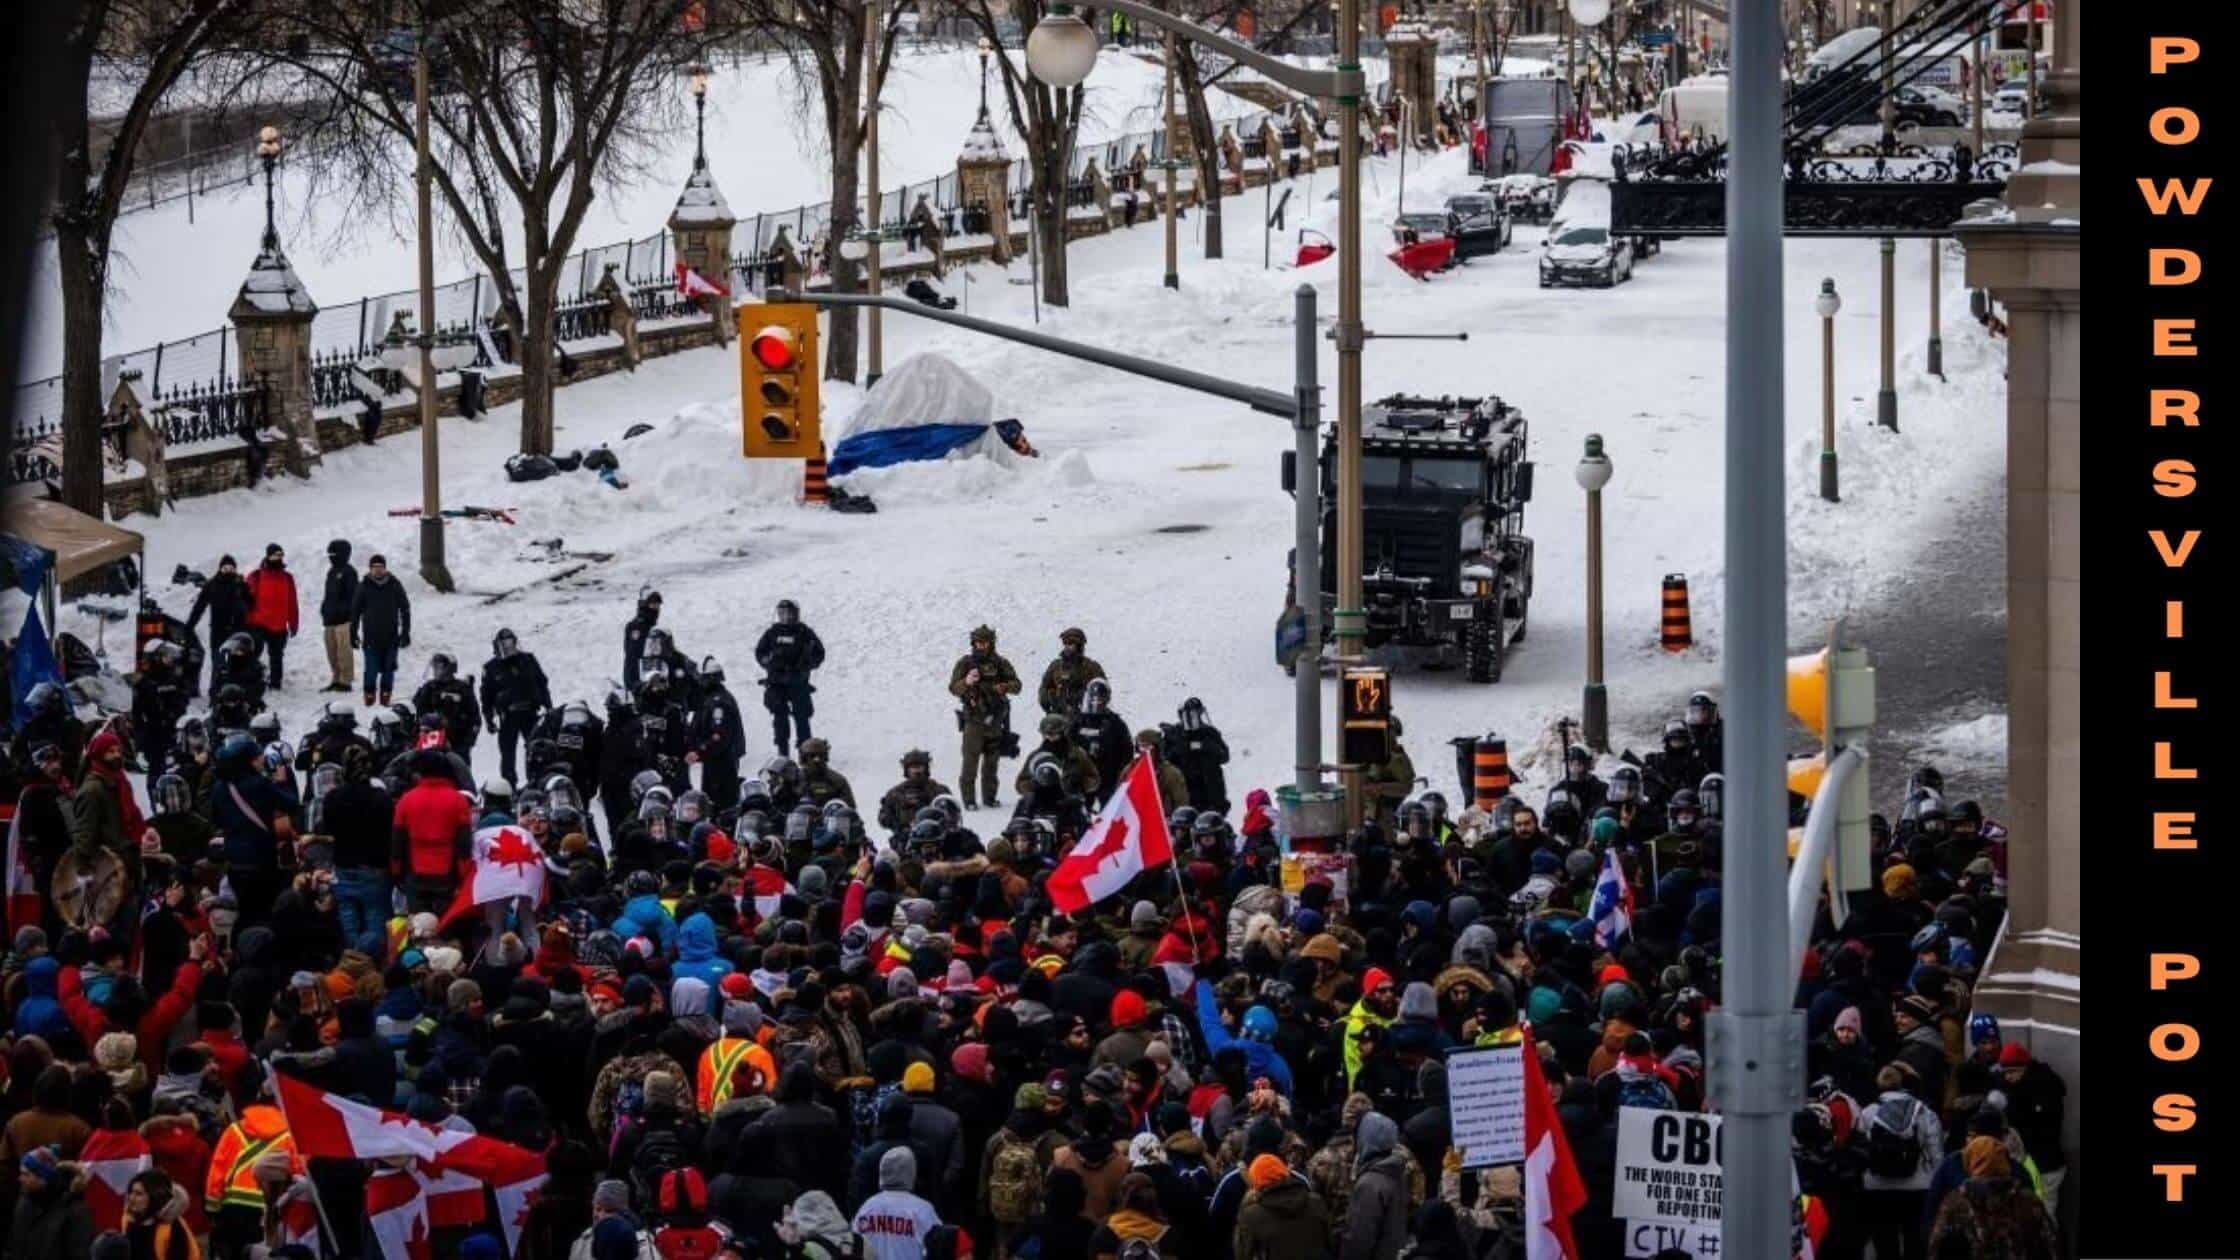 The Canadian Police Arrested Protesters Against The Covid Restrictions